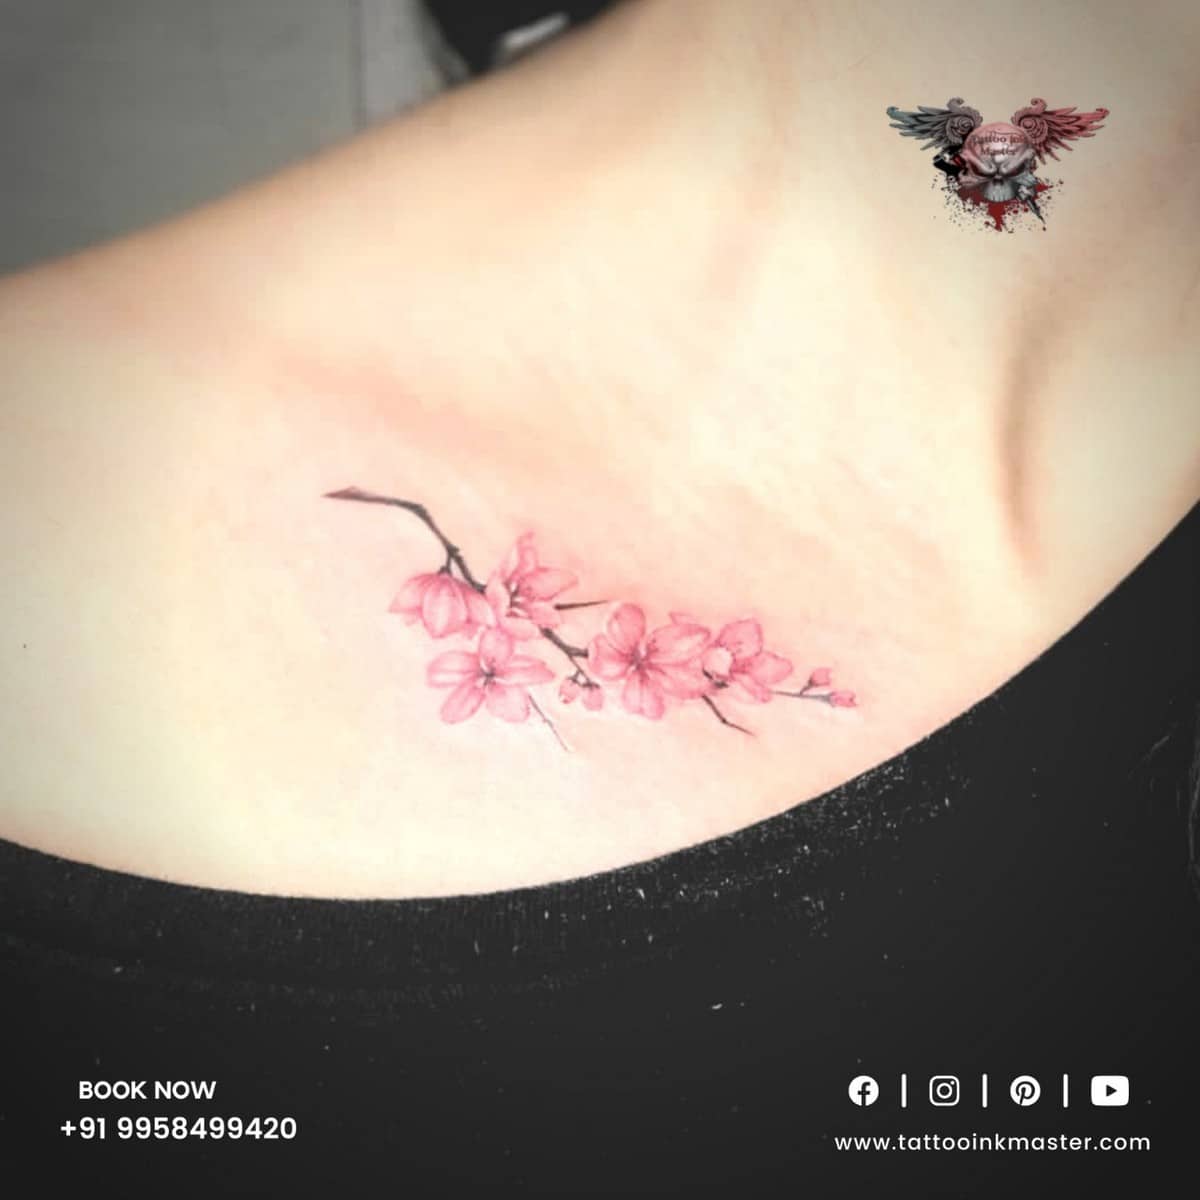 The Cherry Blossoms Tattoo